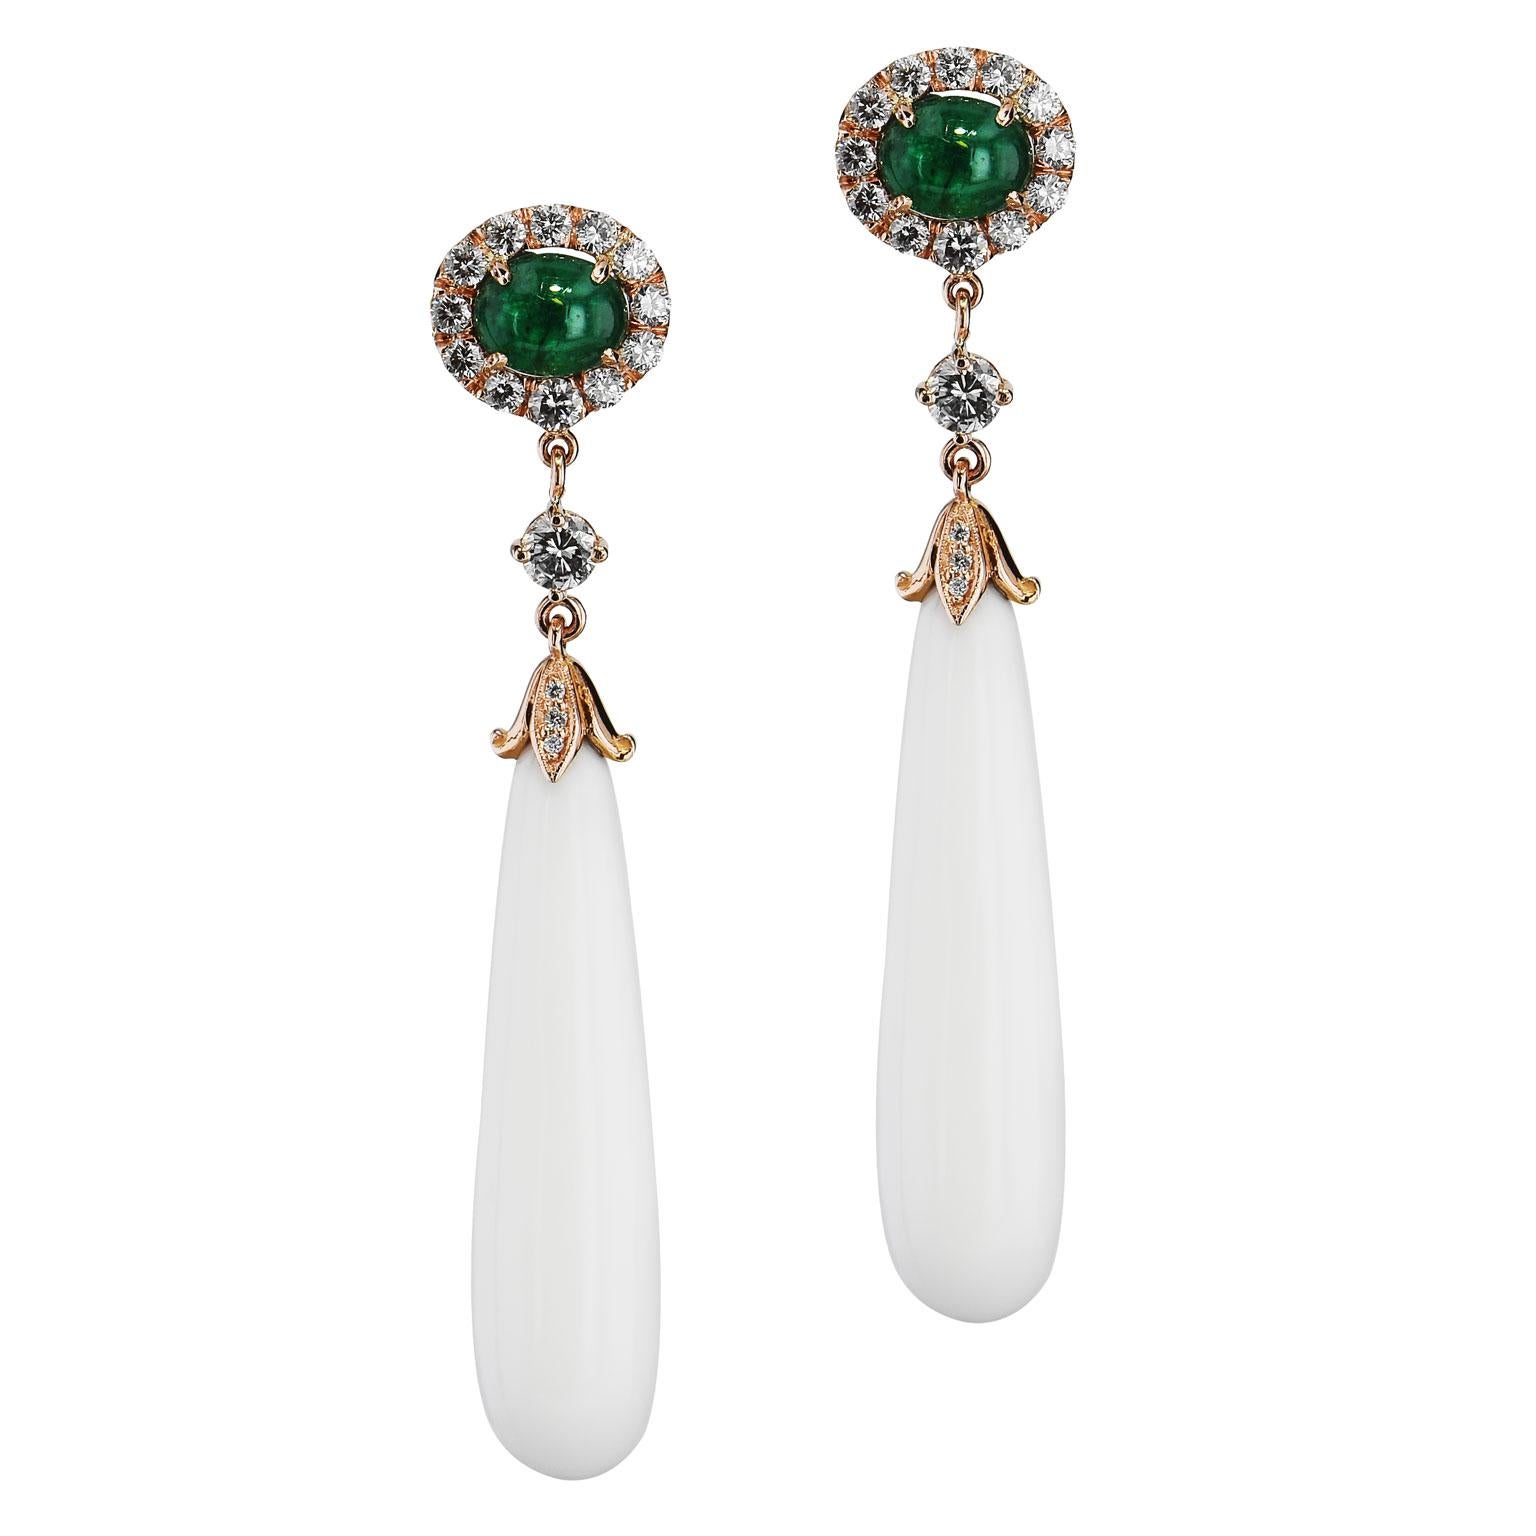 Handmade Zambian Emerald Agate Rose Gold Diamond Pave Drop Earrings In New Condition For Sale In Miami, FL